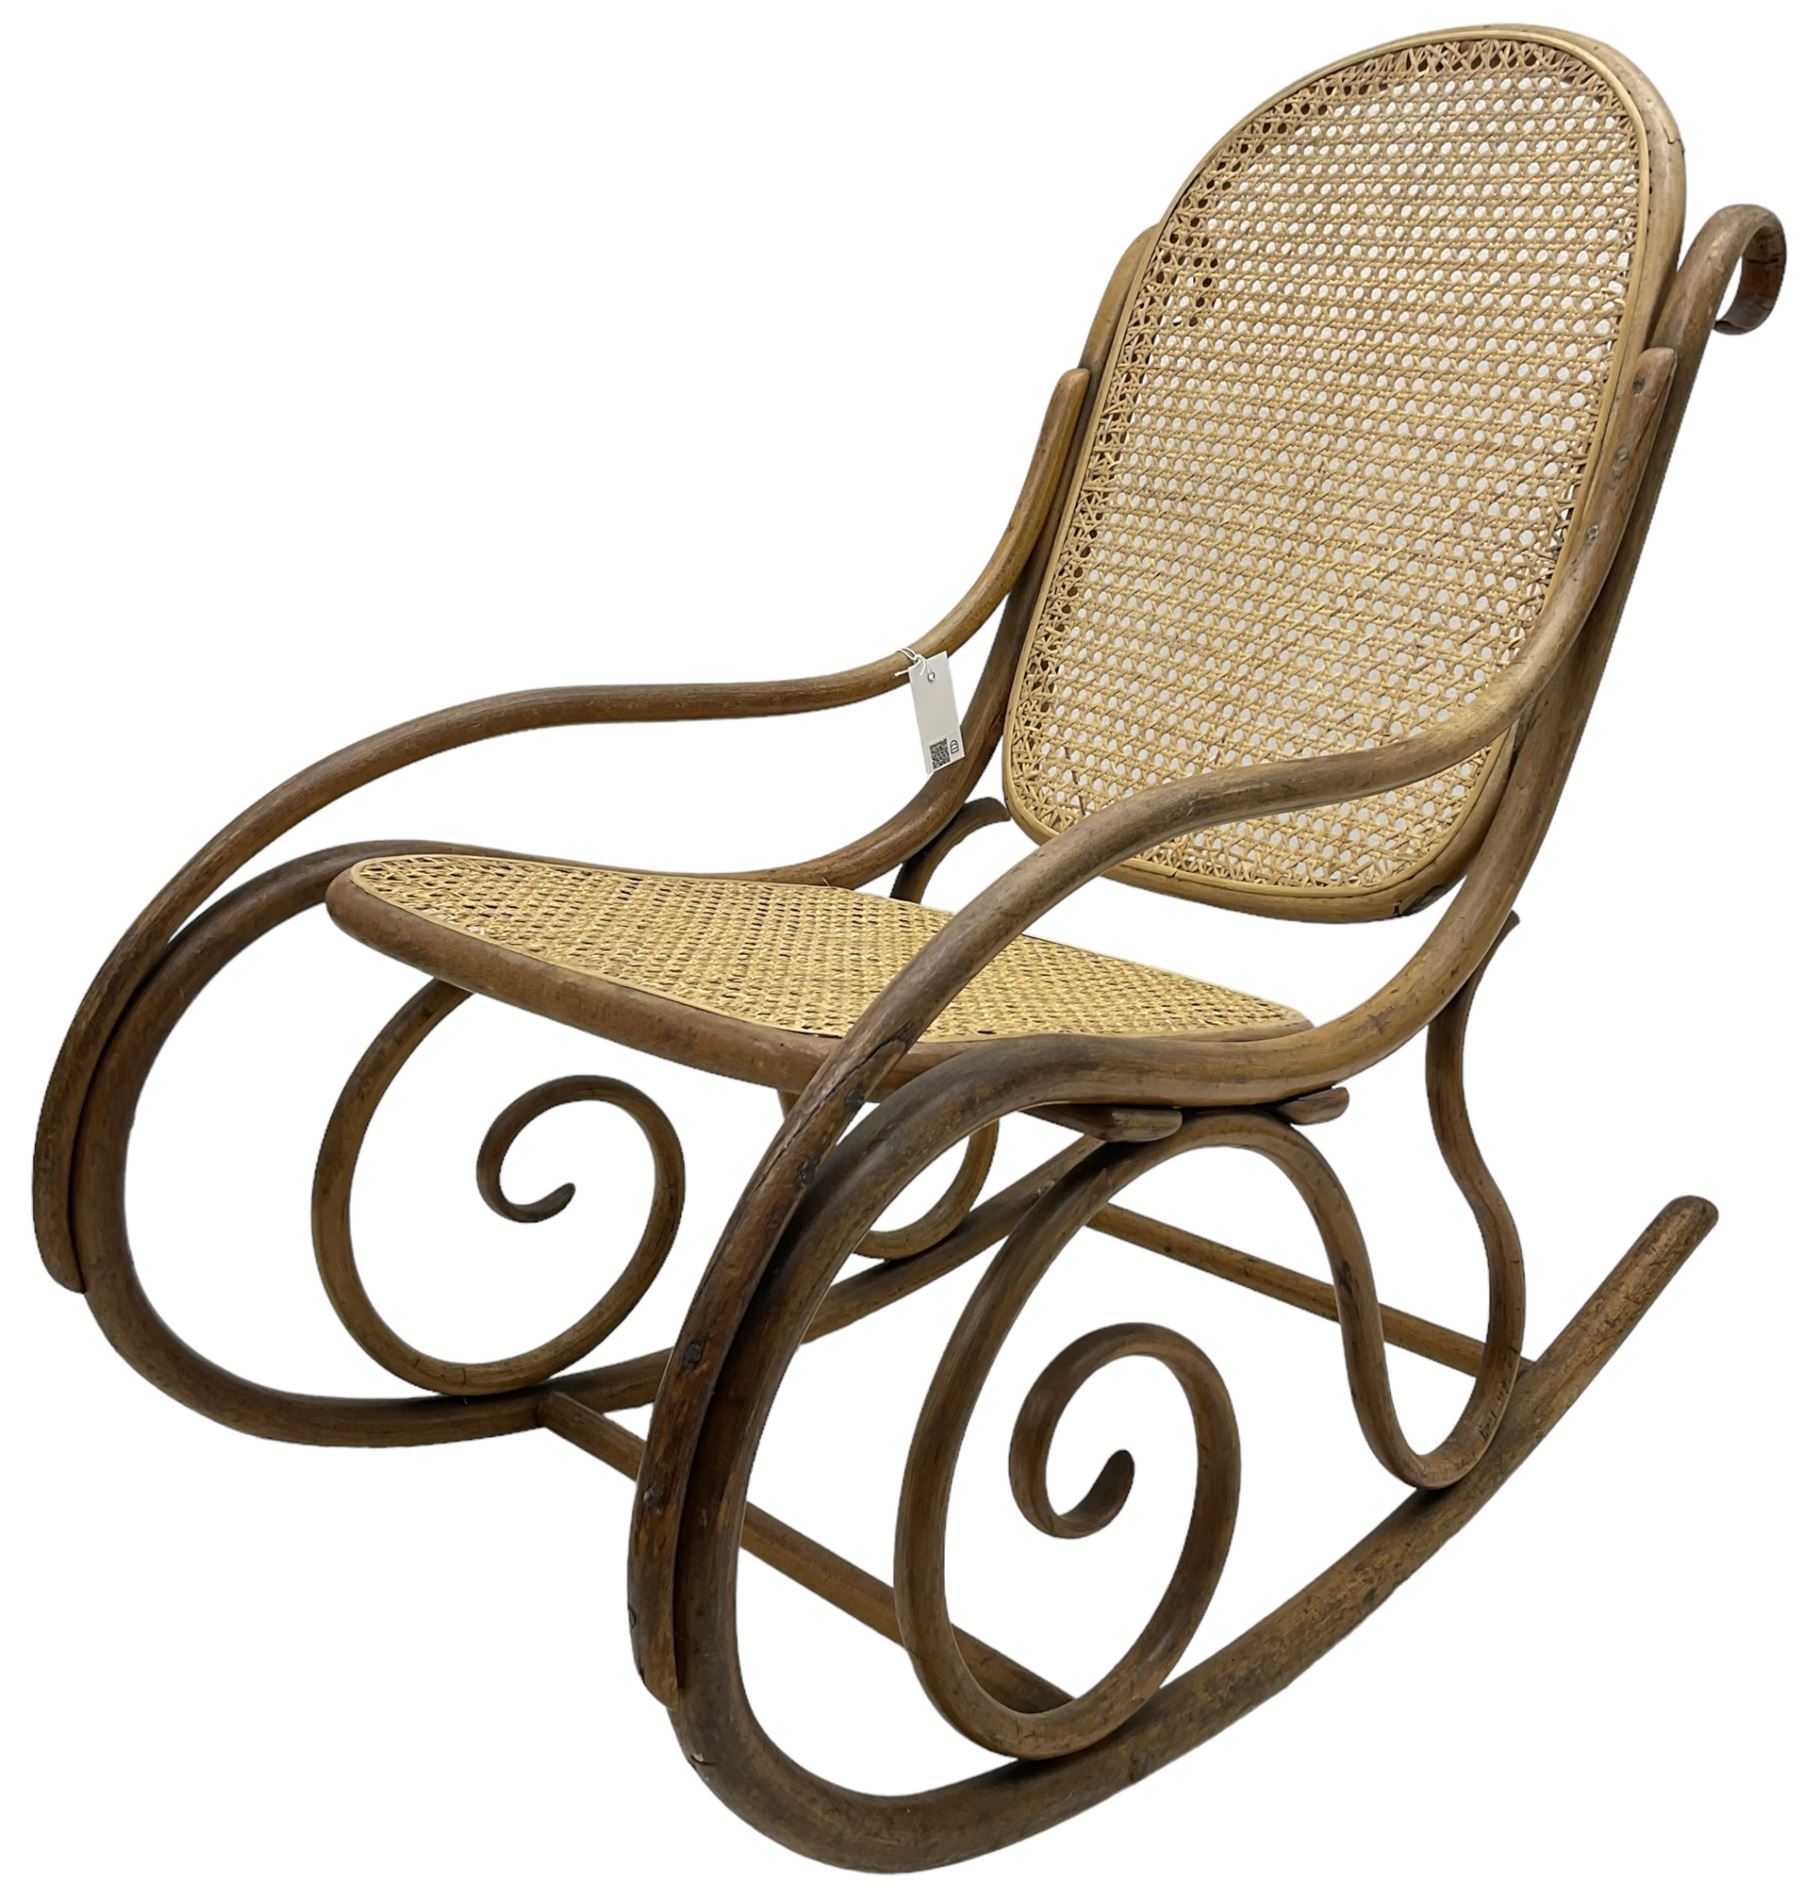 Early 20th century Michael Thonet design bentwood rocking chair - Image 2 of 7